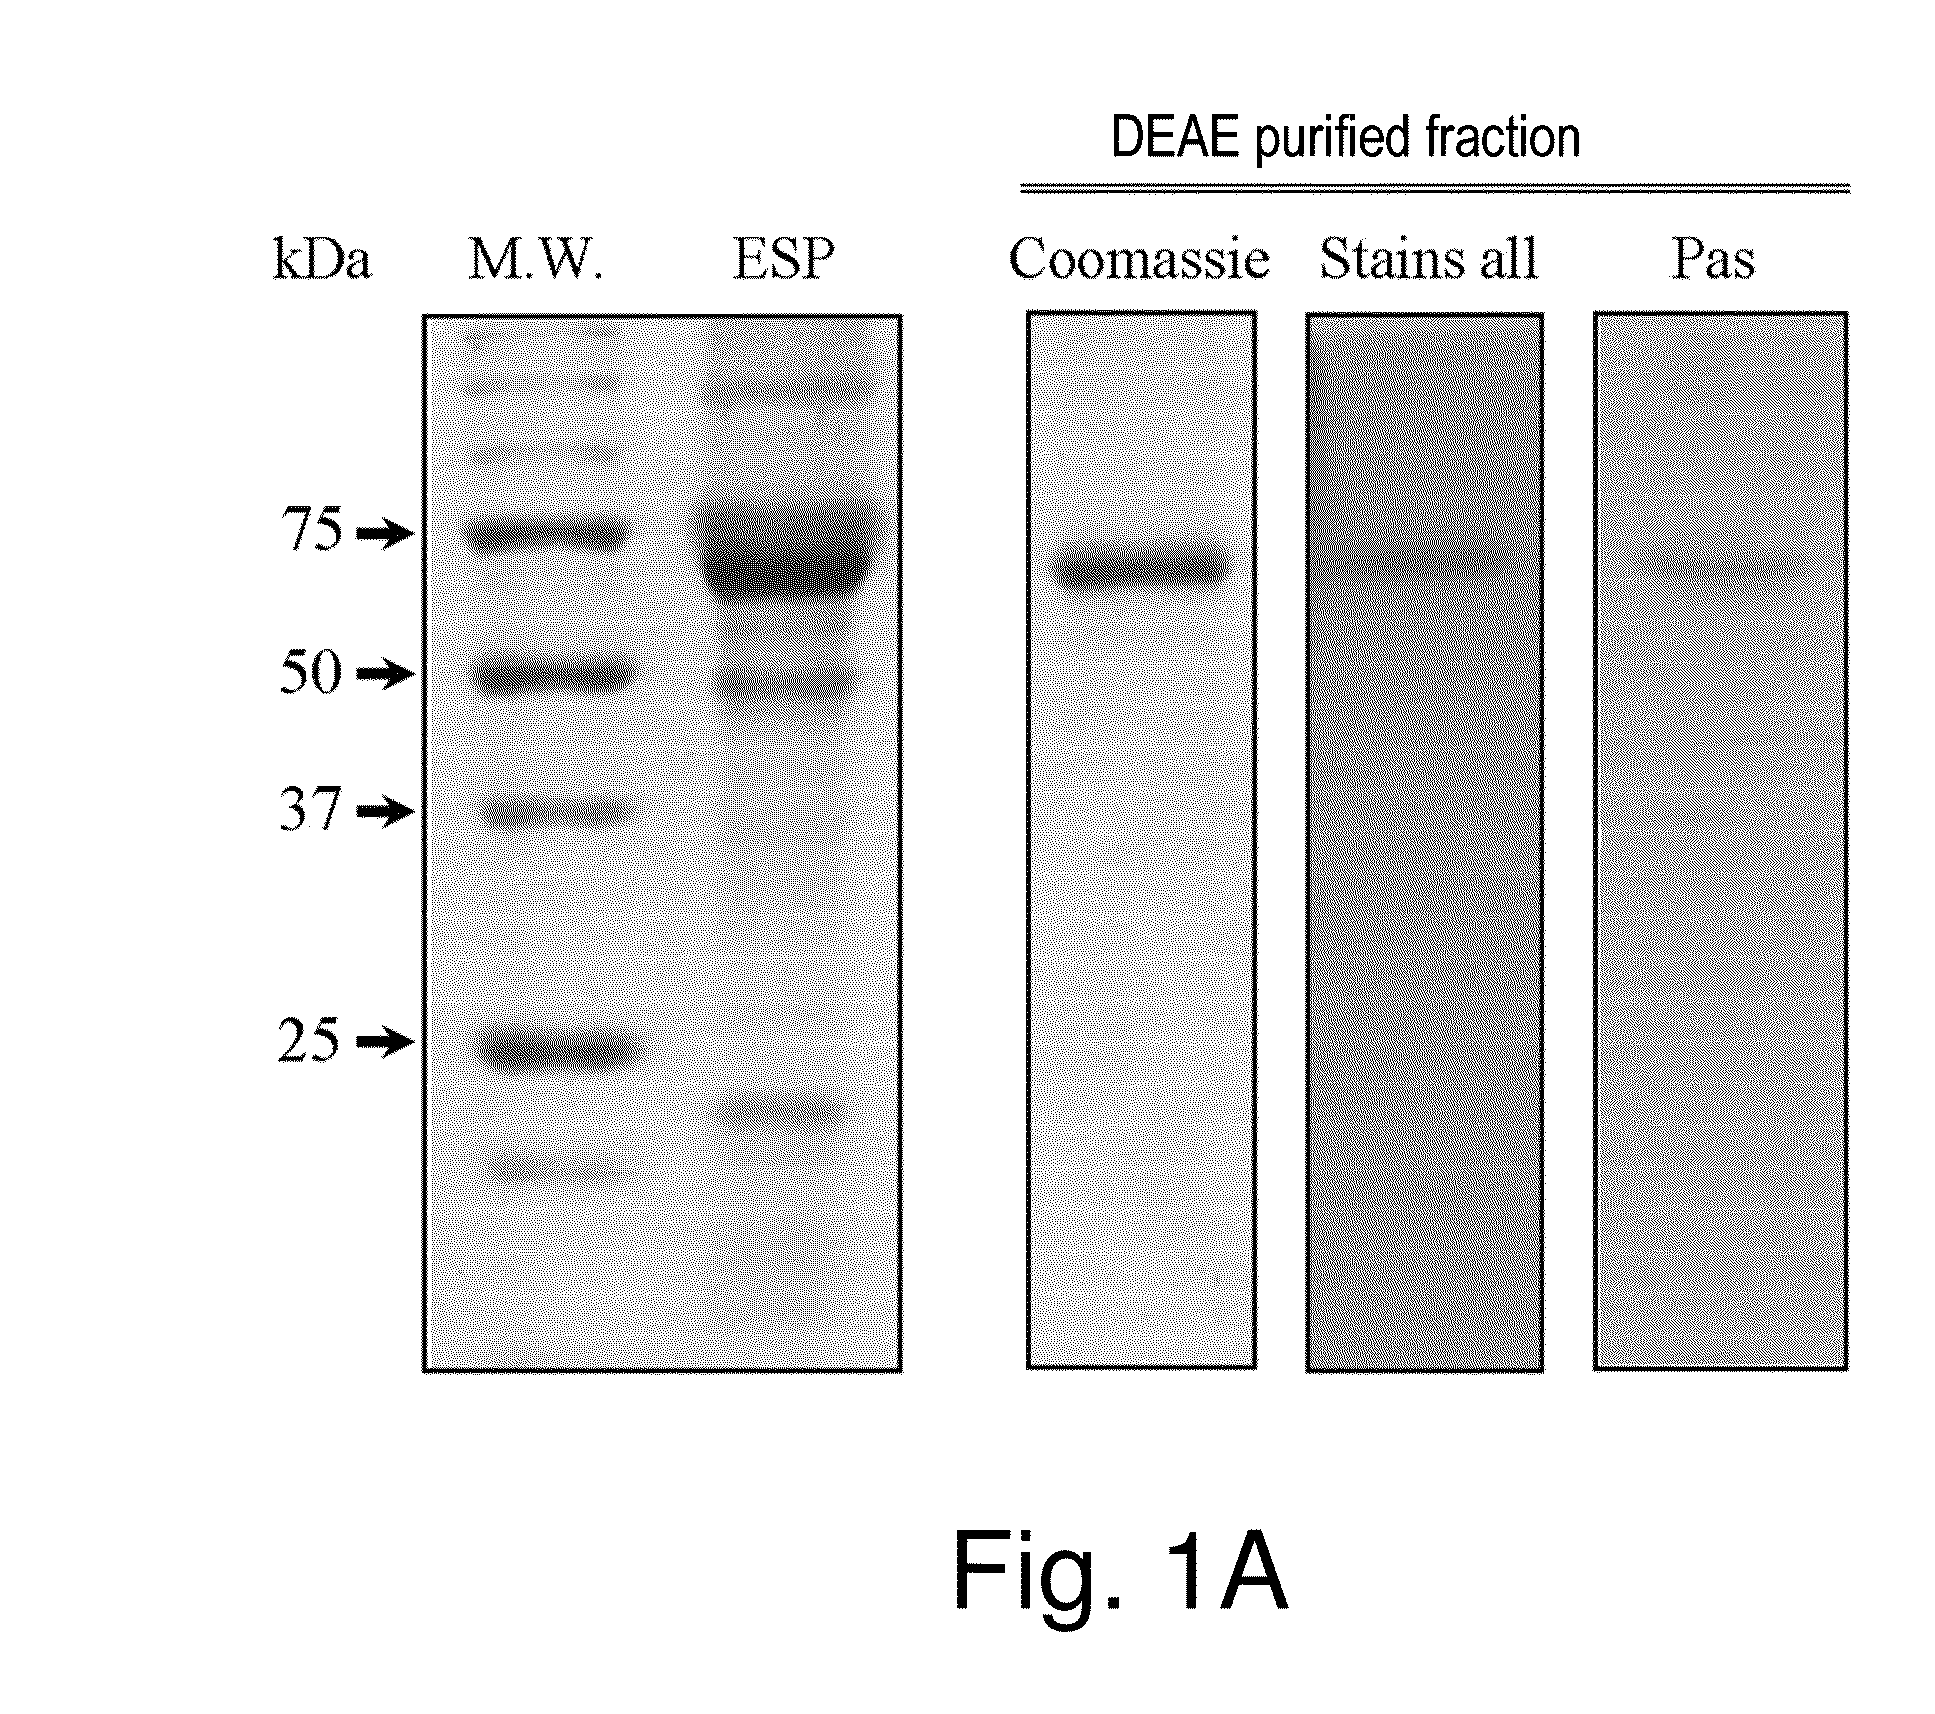 Stable amorphous calcium carbonate comprising synthetic phosphorylated peptides